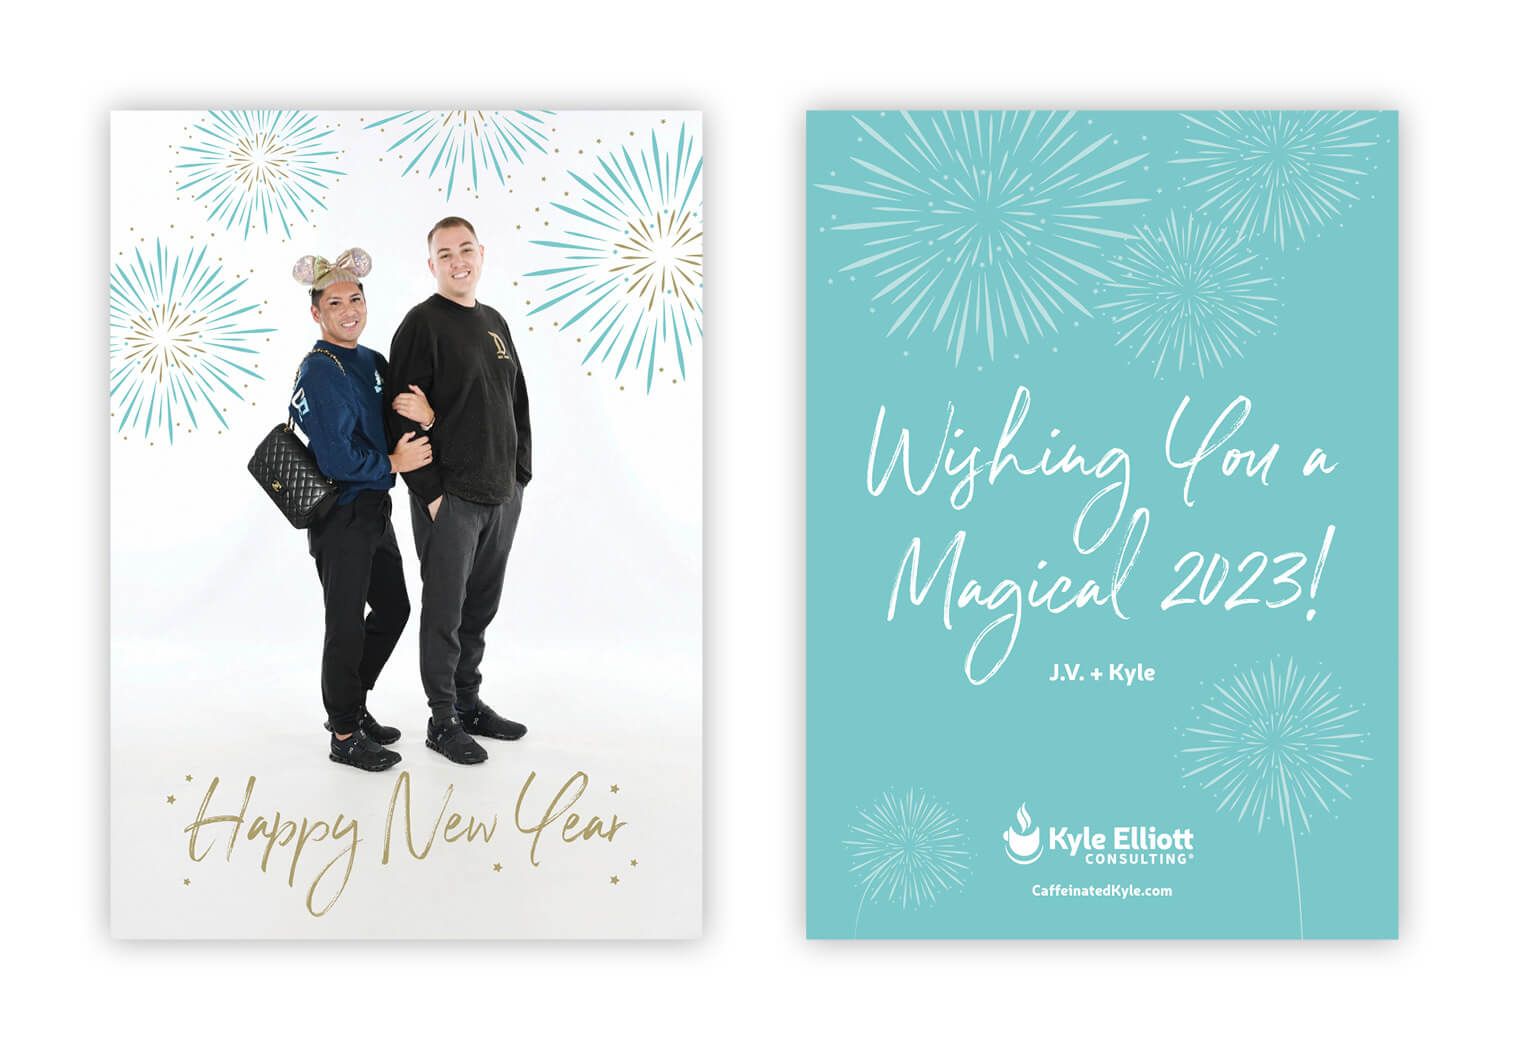 a holiday card wishing a happy new year 2023